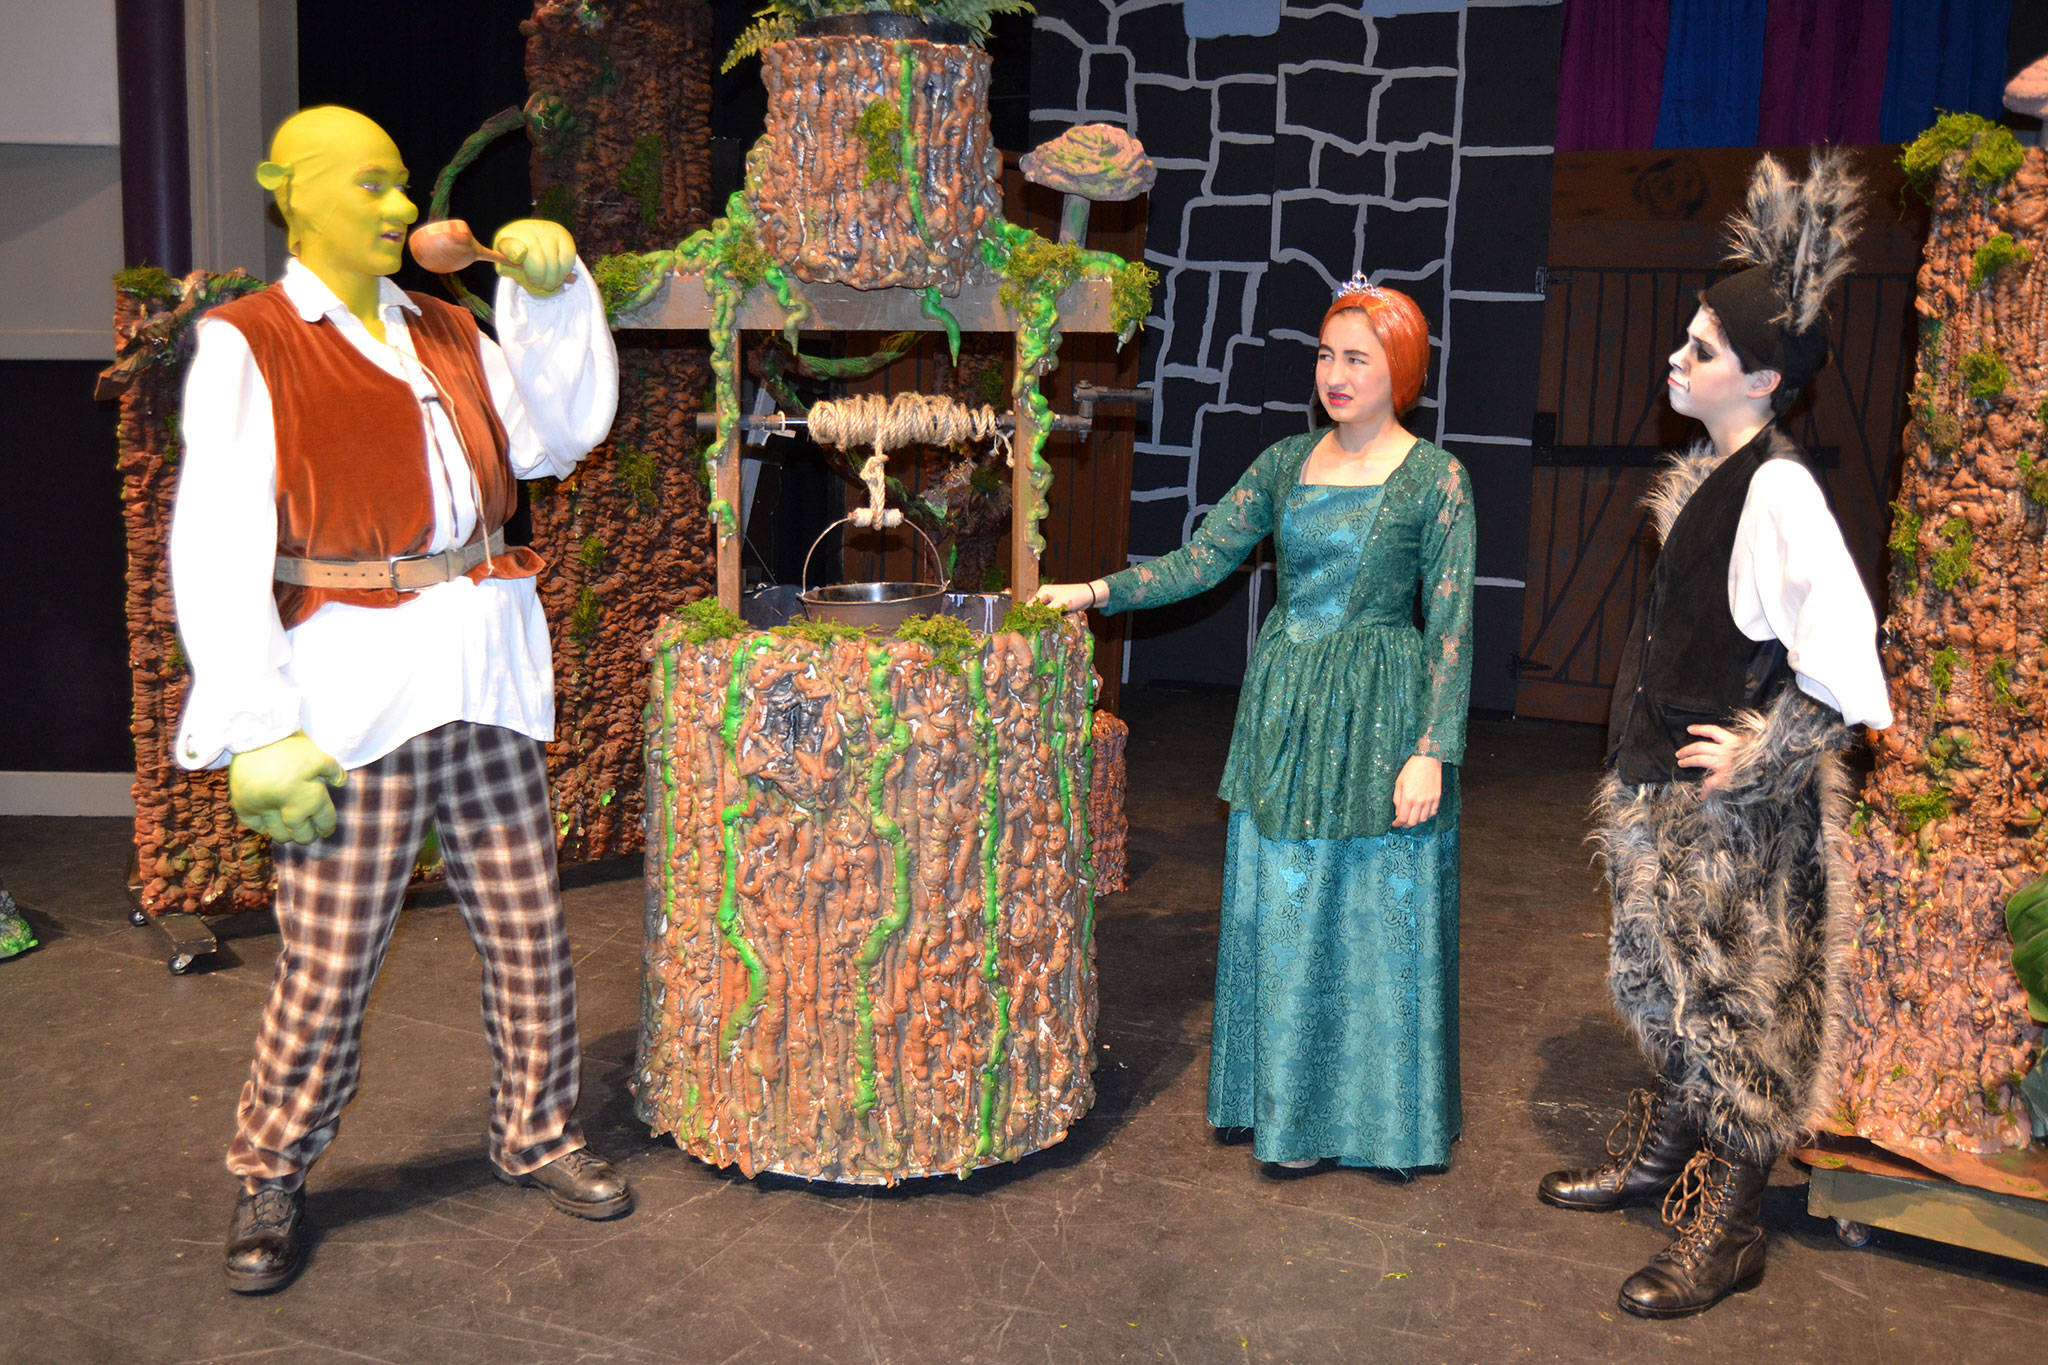 Shrek (Ashton Smith) takes a drink while Princess Fiona (Kariya Johnson) and Donkey (Ayden Humphries) wait for him to finish. The trio star in Sequim Middle School’s production of “Shrek the Musical Jr.” on March 8-10 at Sequim High School. Sequim Gazette photo by Matthew Nash